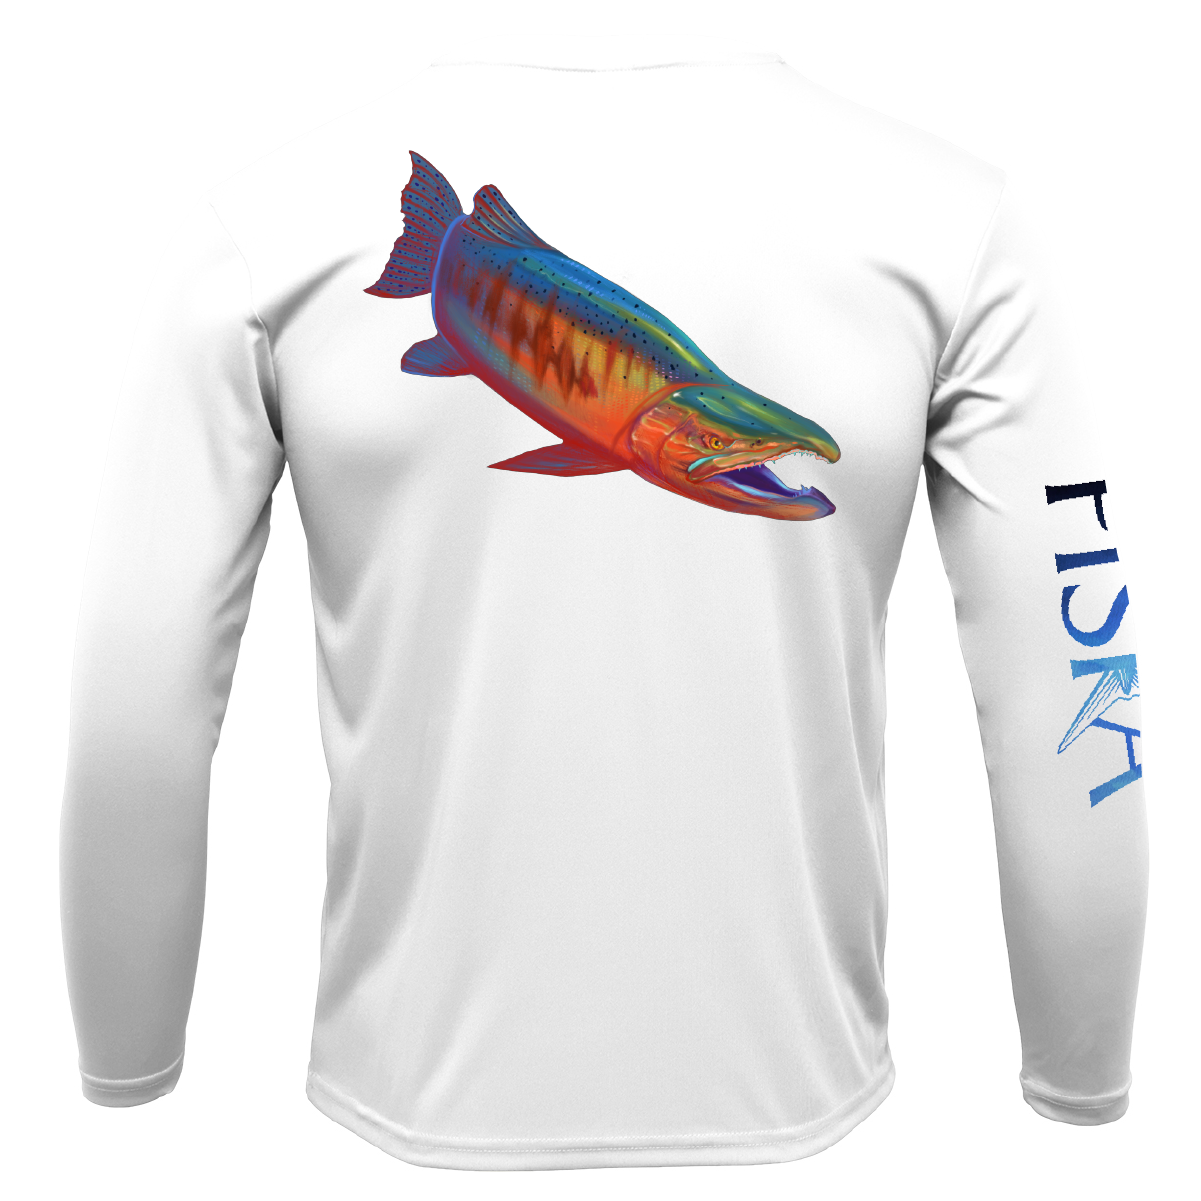 Youth Salmon Long-Sleeve Dry-Fit Shirt